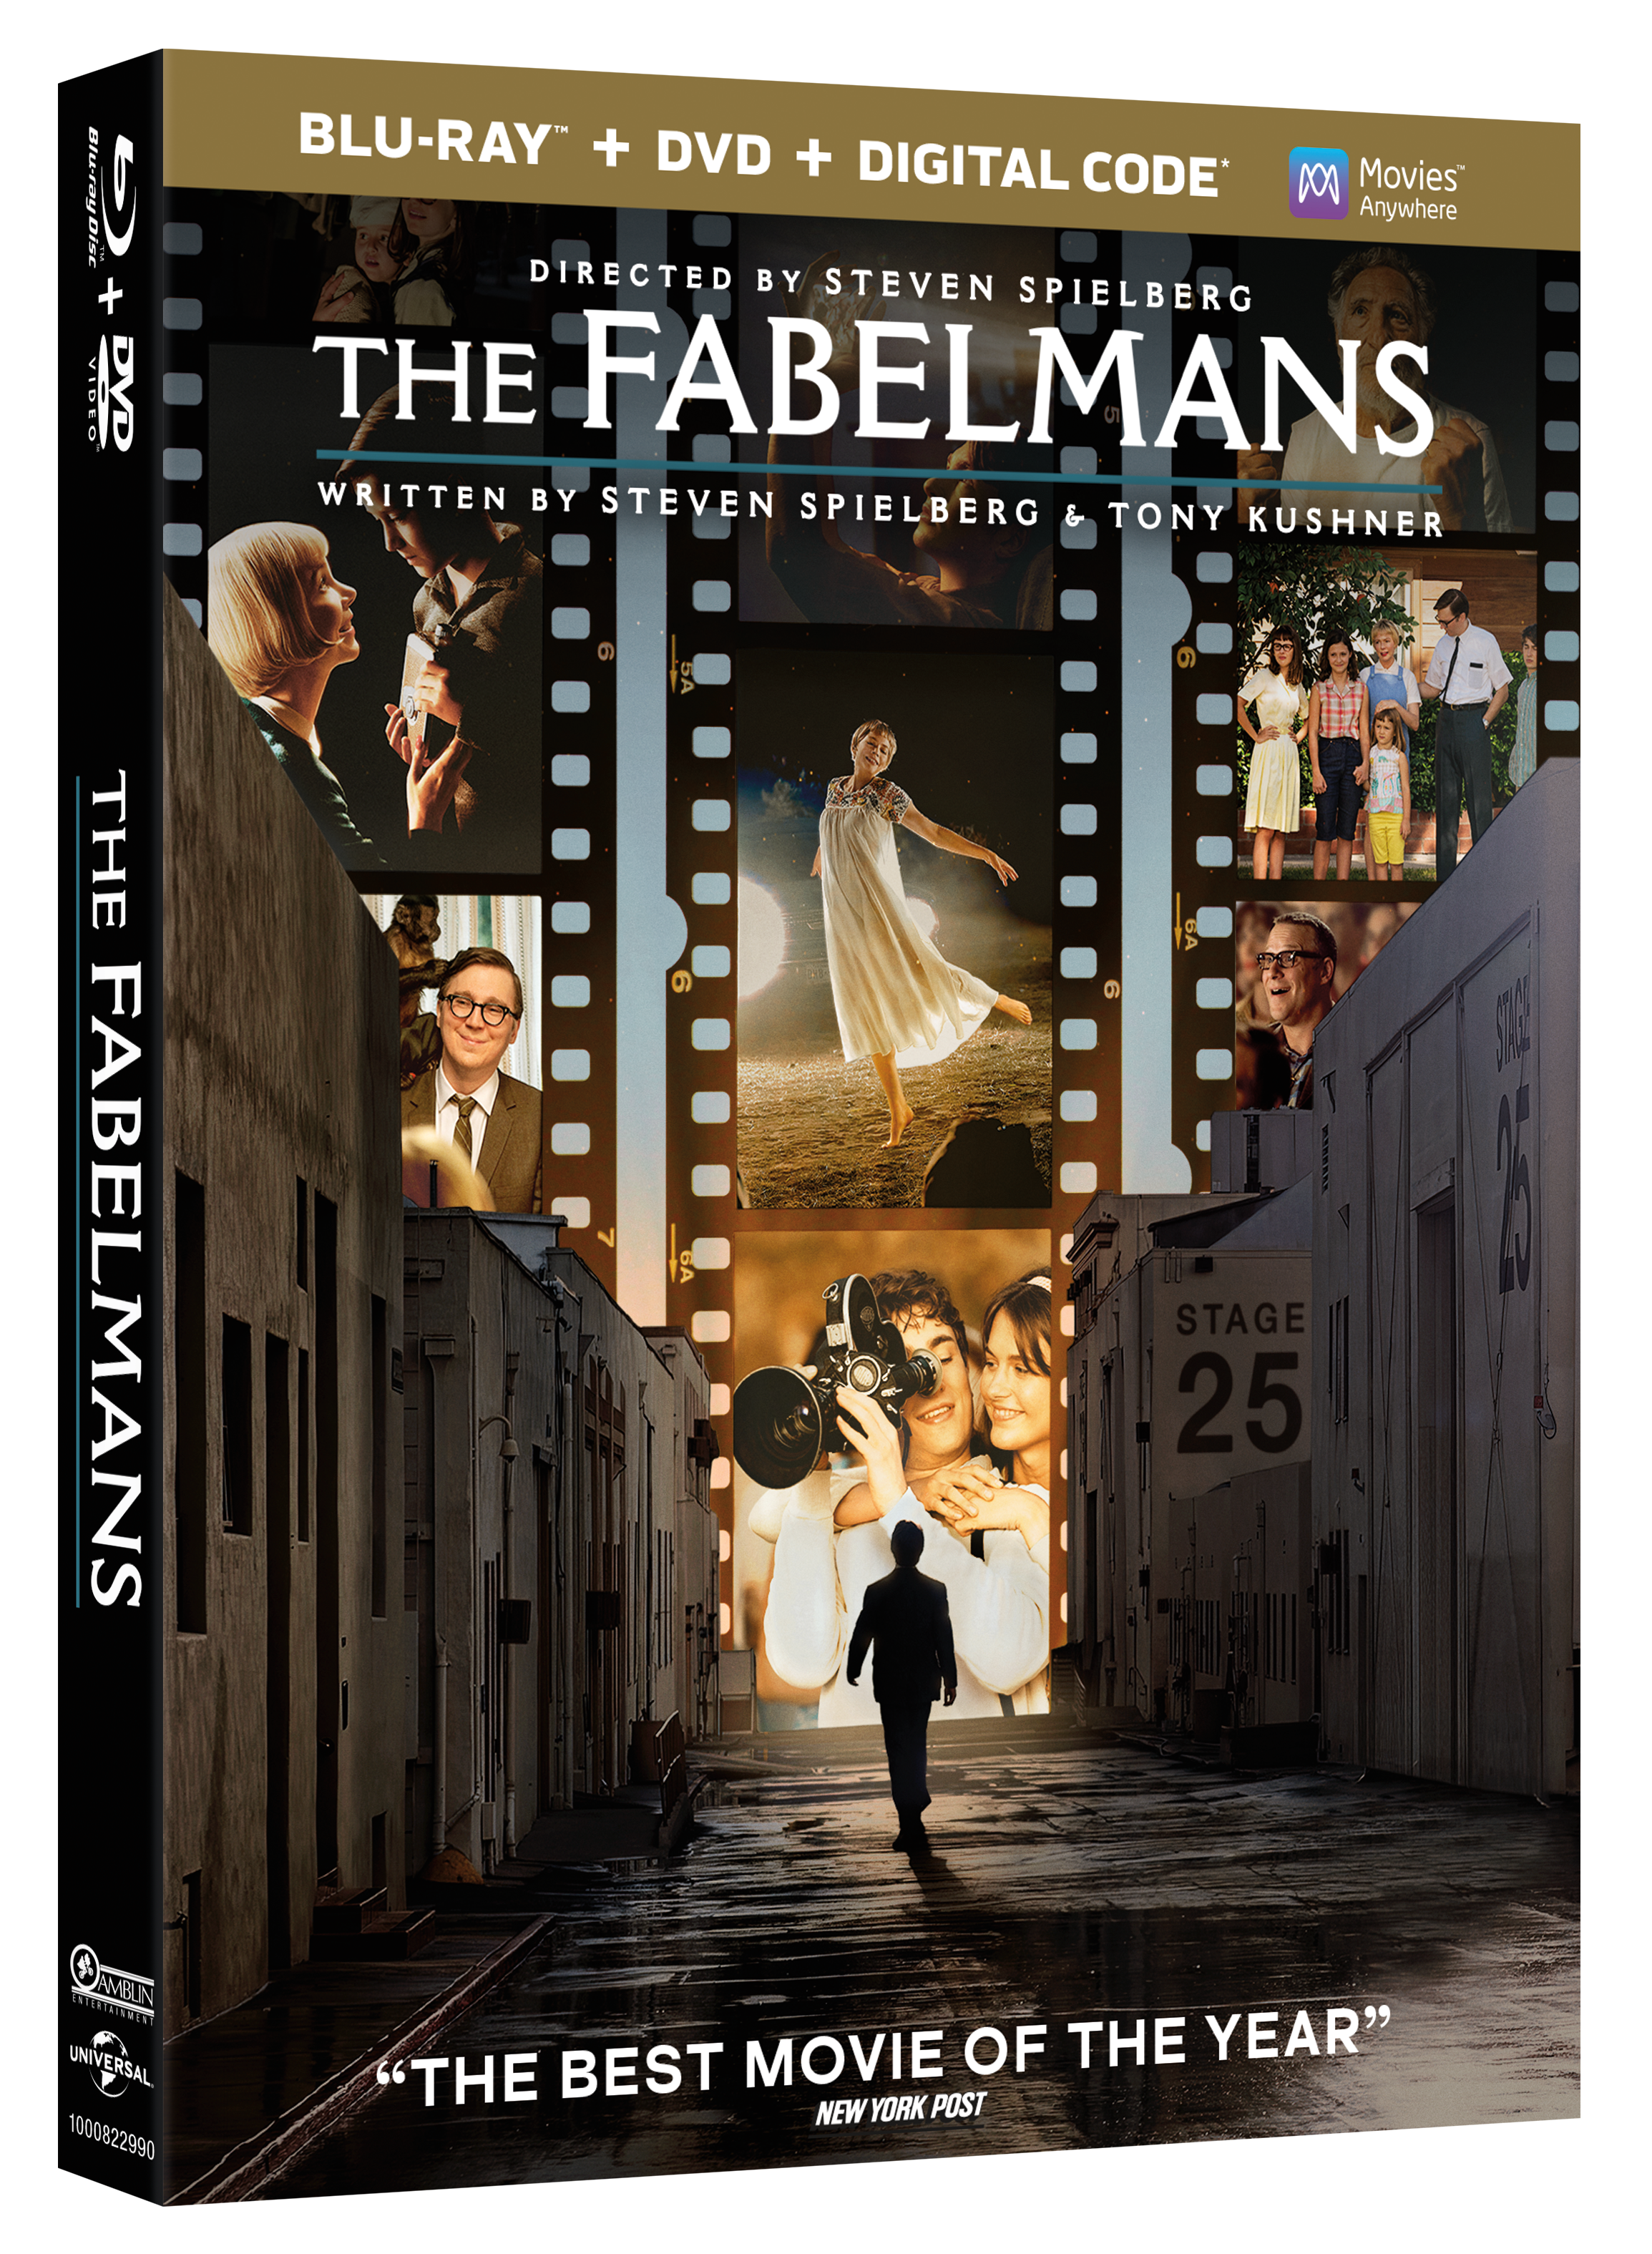 The Fabelmans Blu-ray Review